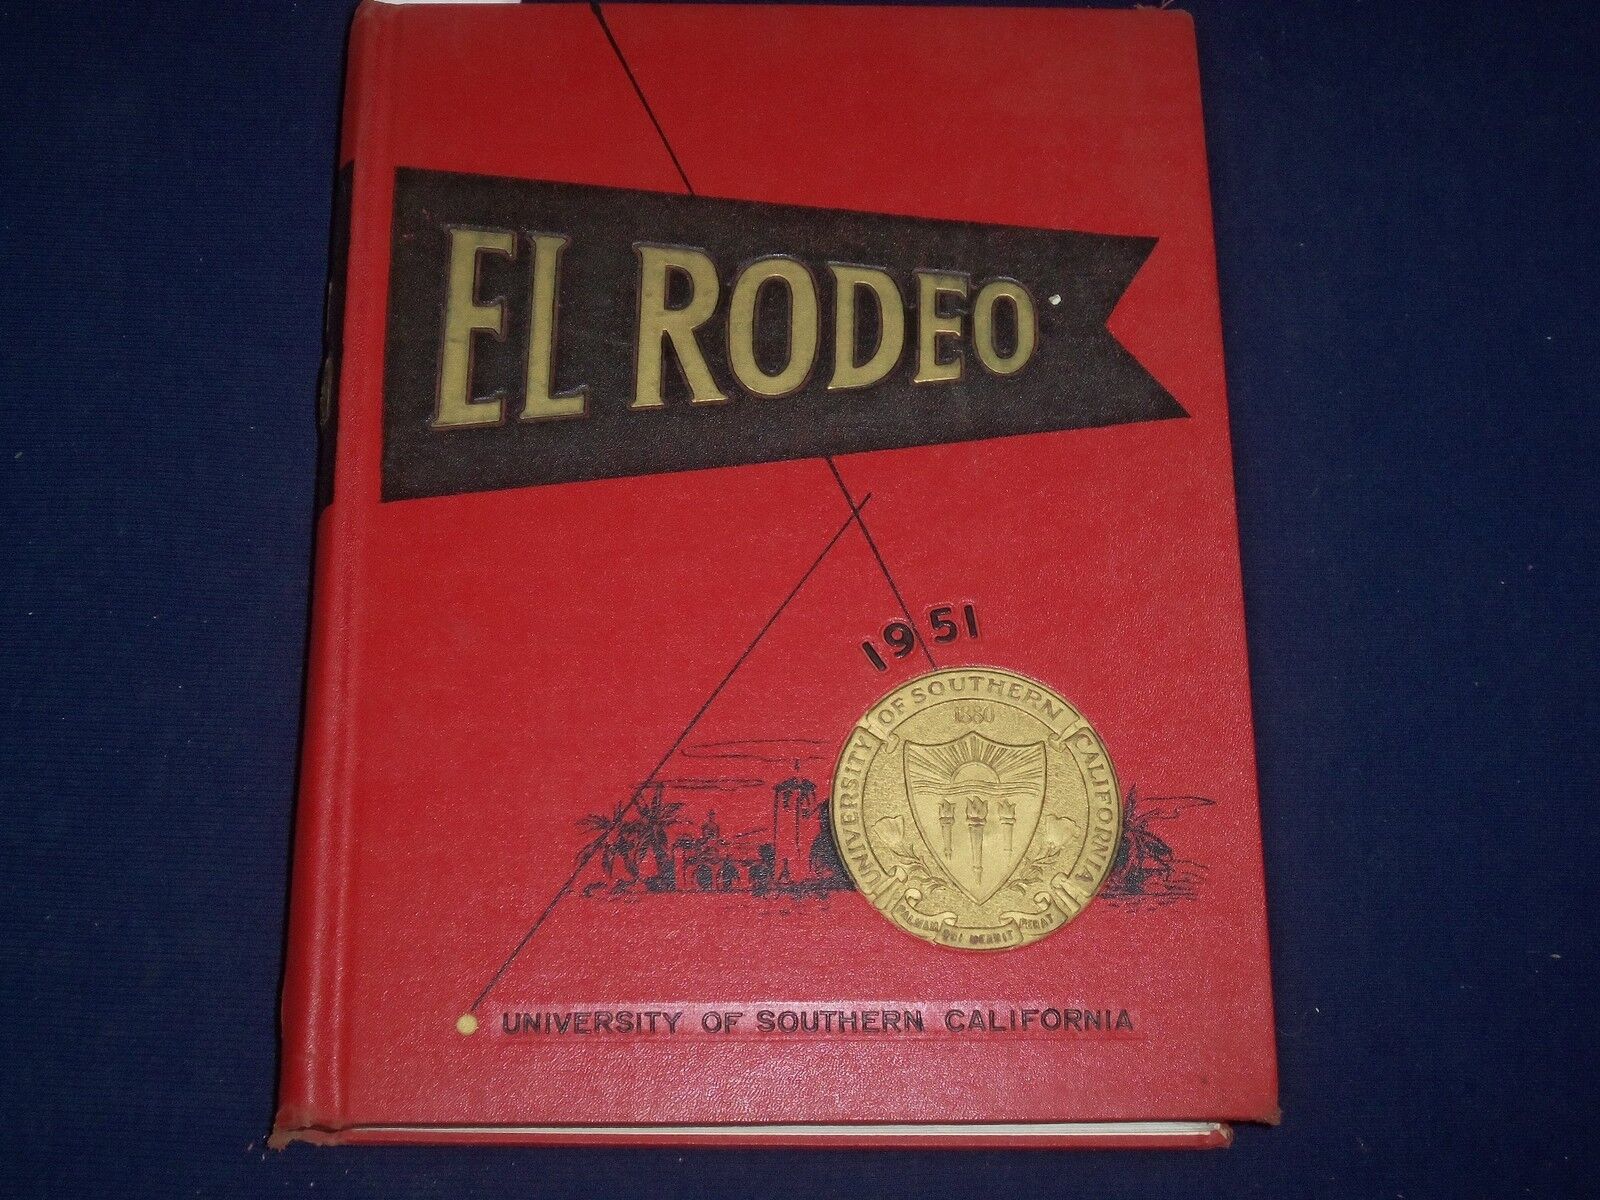 1951 EL RODEO UNIVERSITY SOUTHERN CALIFORNIA YEARBOOK - FRANK GIFFORD - YB 433